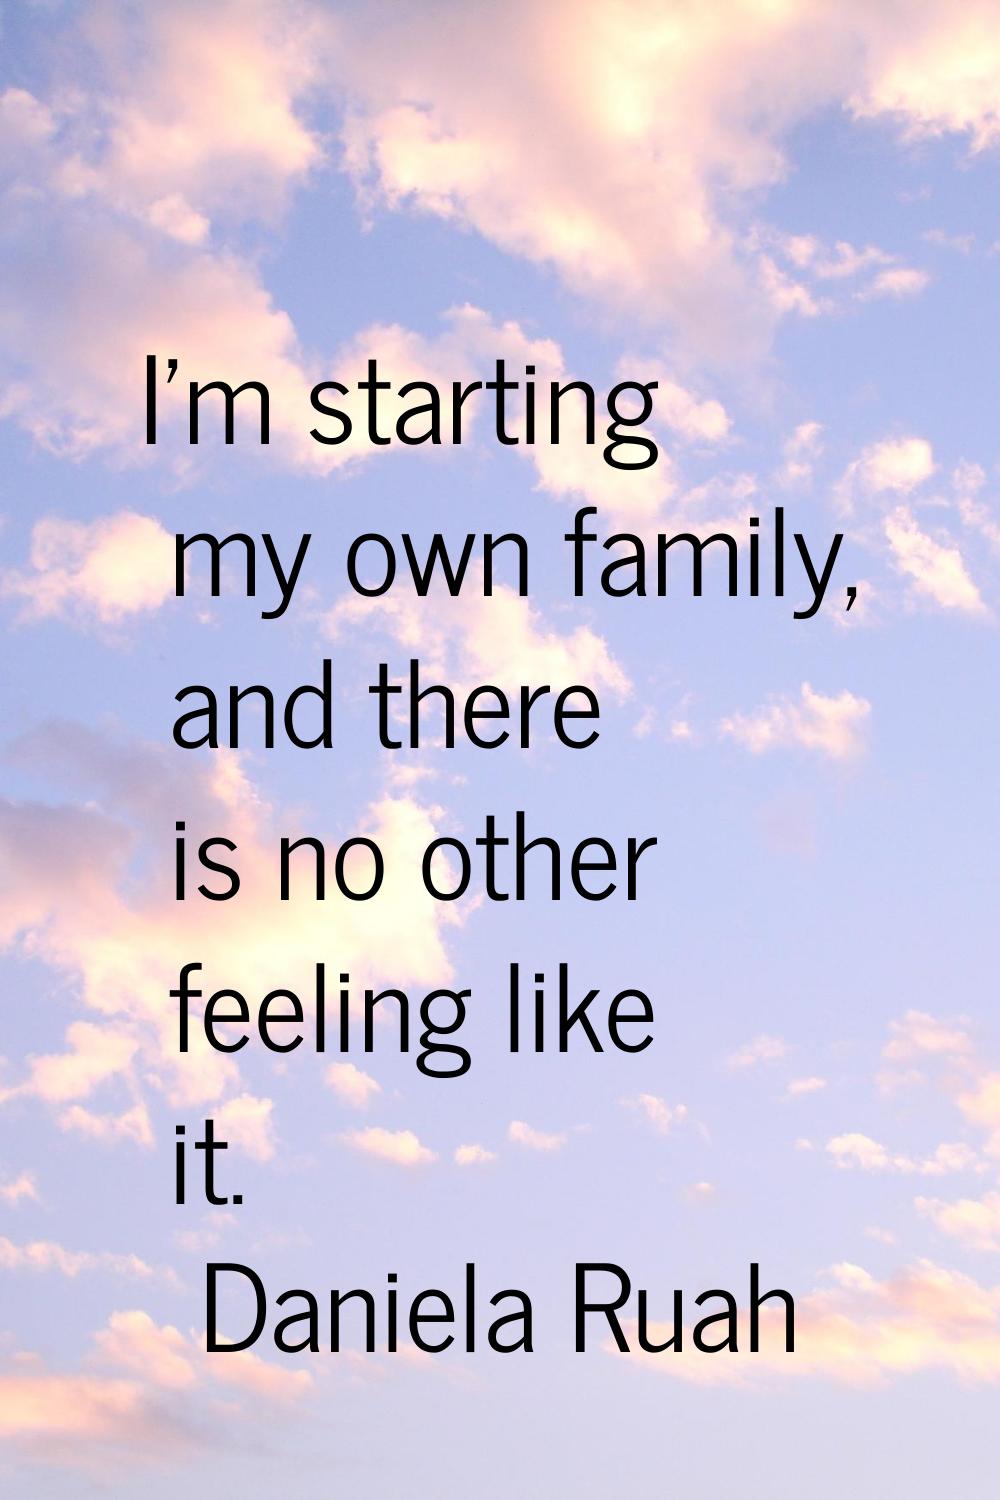 I'm starting my own family, and there is no other feeling like it.